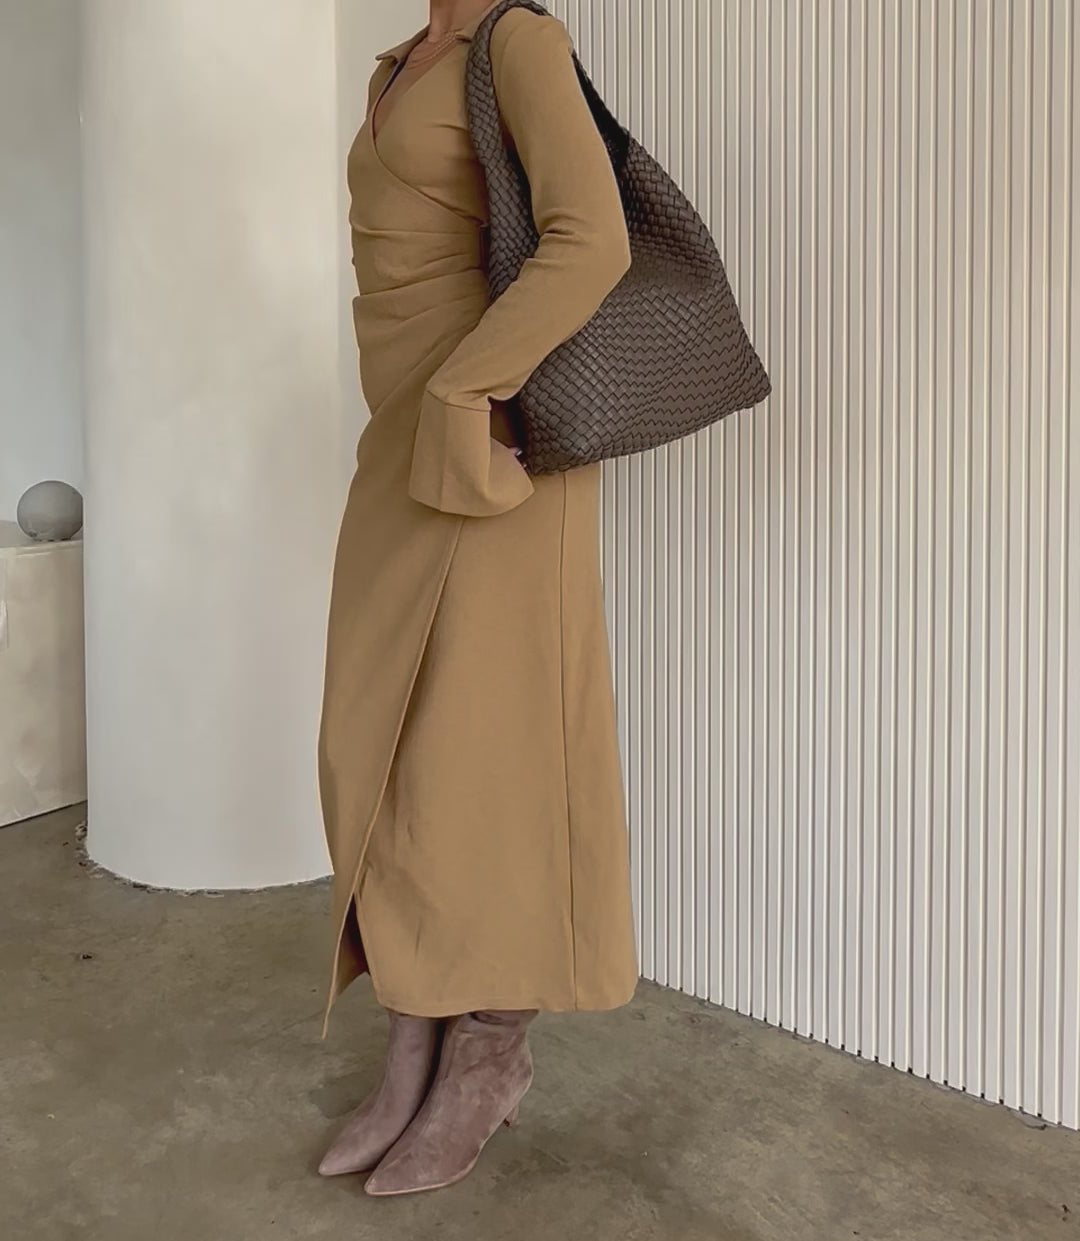 Video of a model wearing a large woven vegan leather shoulder bag against a white wall. 